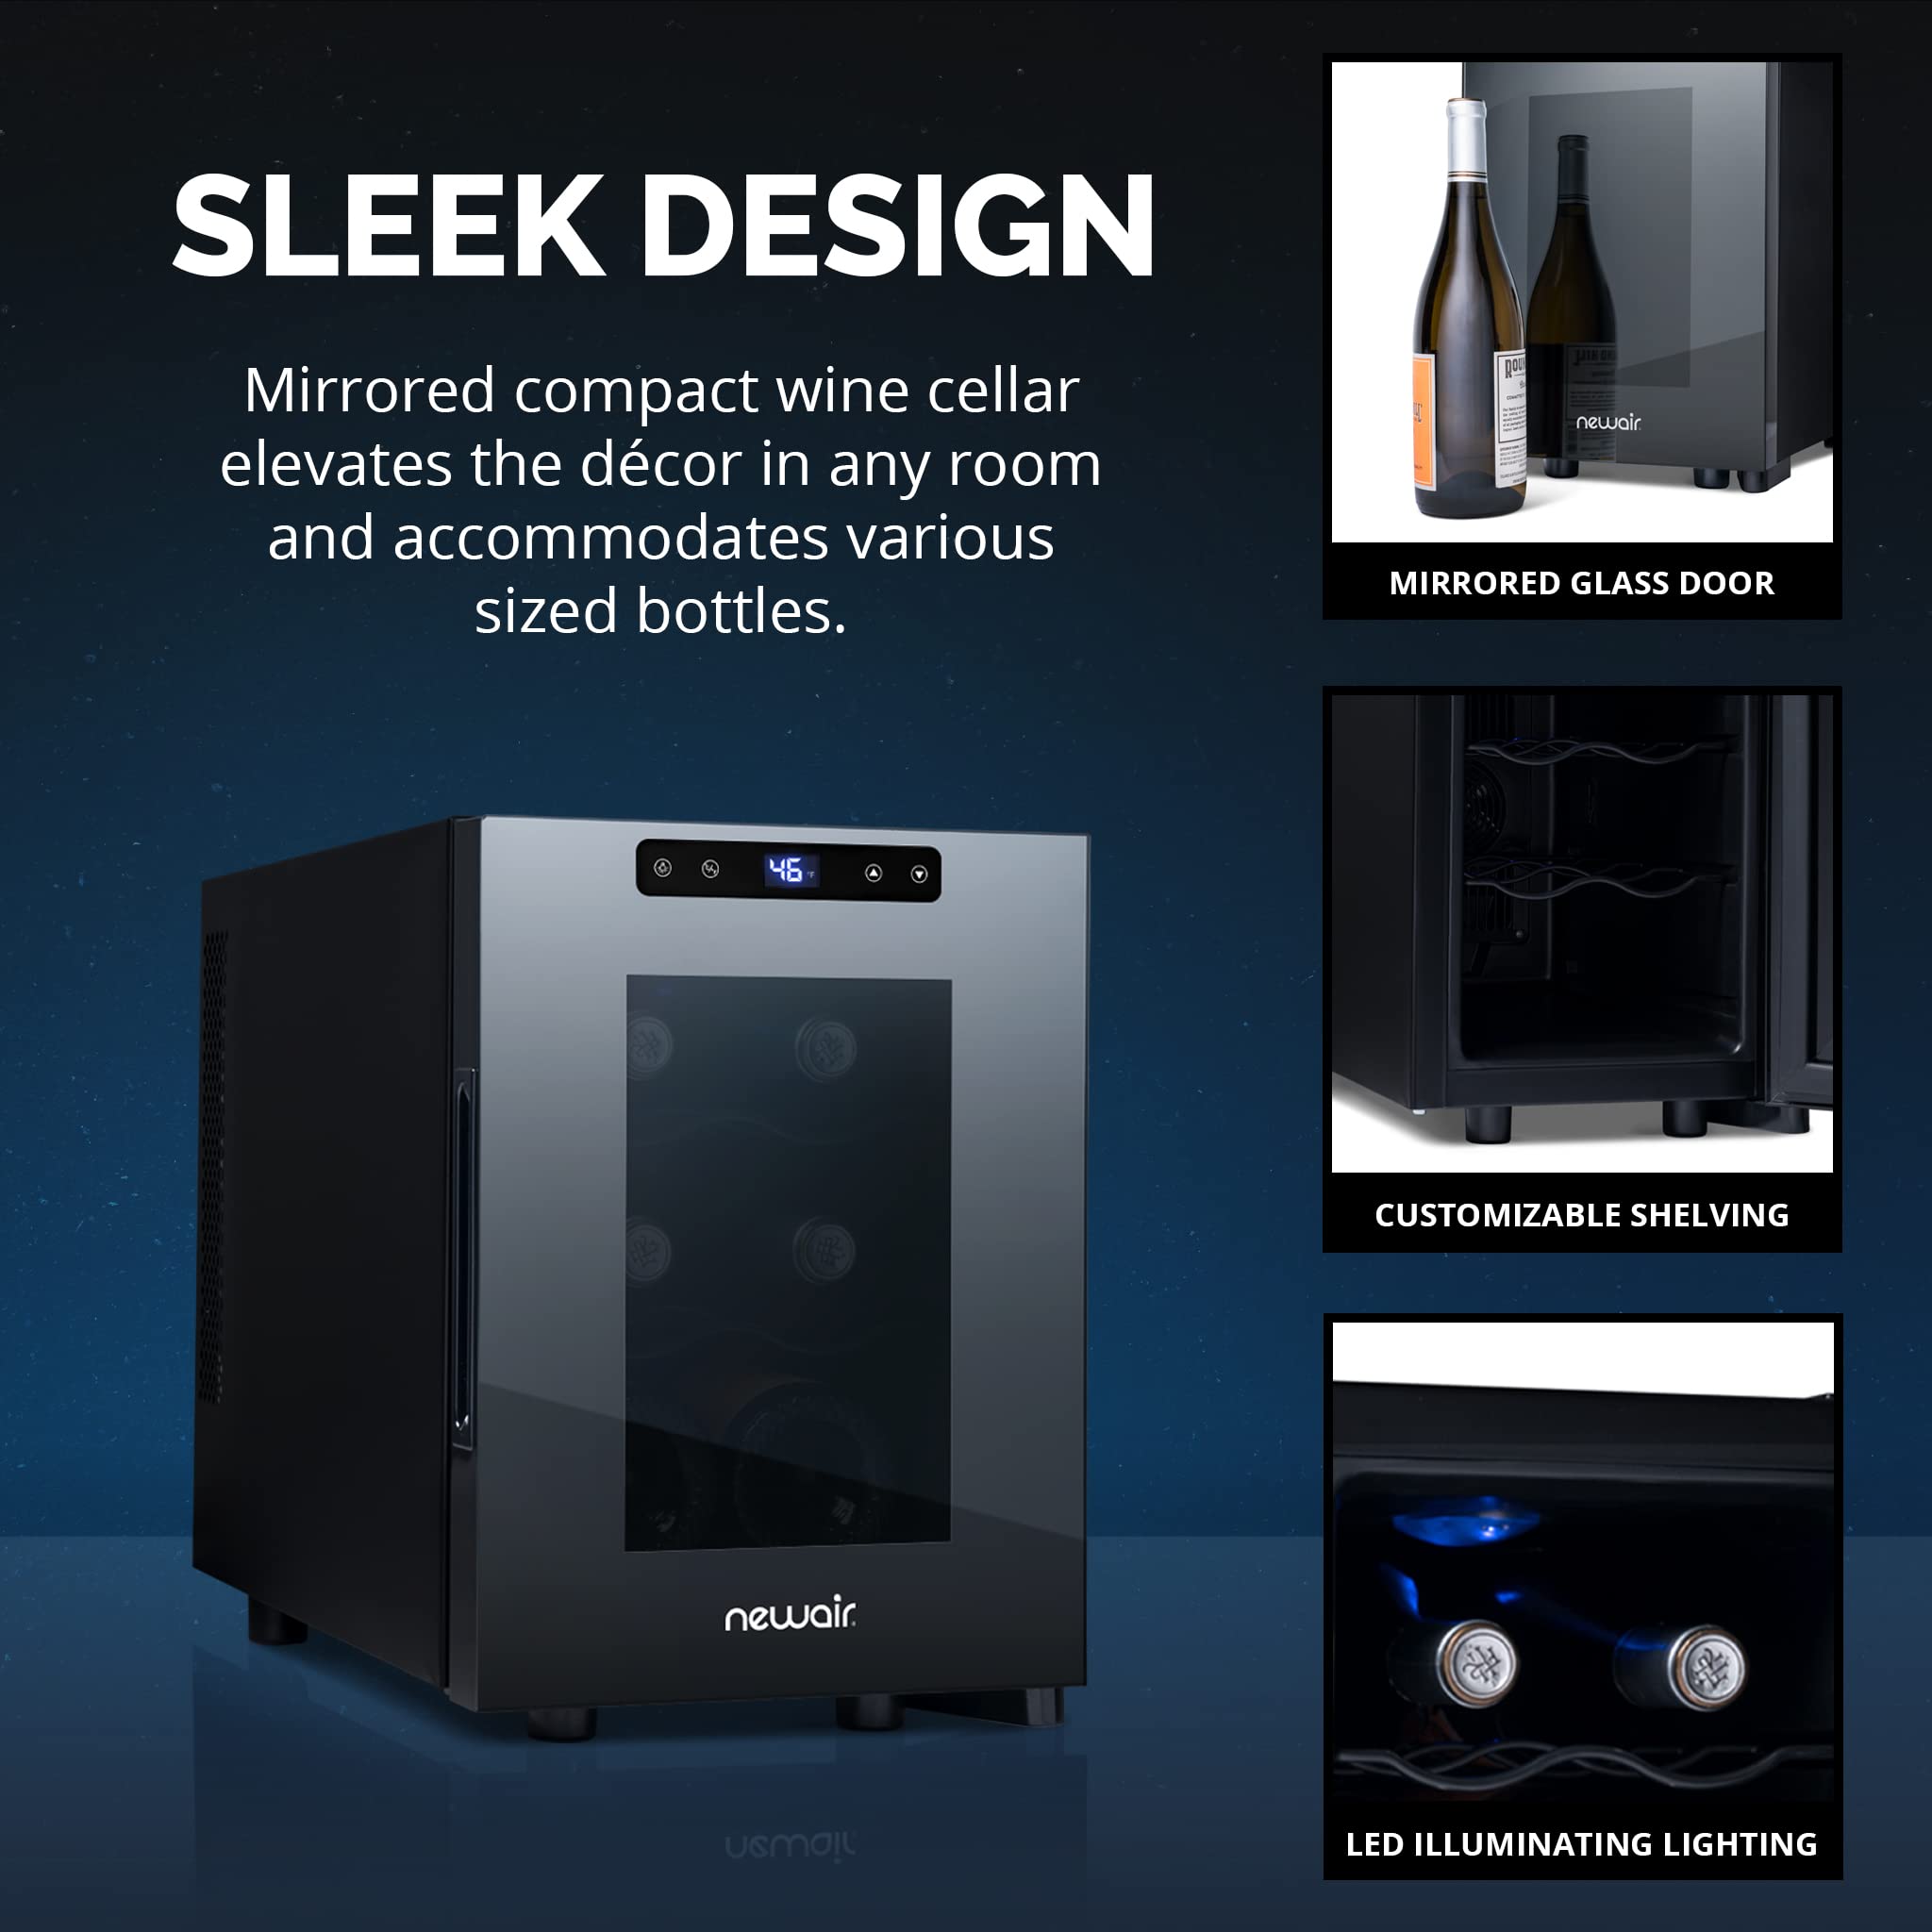 NewAir Shadow-T Series Wine Cooler Refrigerator | 6 Bottle | Countertop Mirrored Compact Wine Cellar with Triple-Layer Tempered Glass Door | Vibration-Free & Ultra-Quiet Thermoelectric Cooling